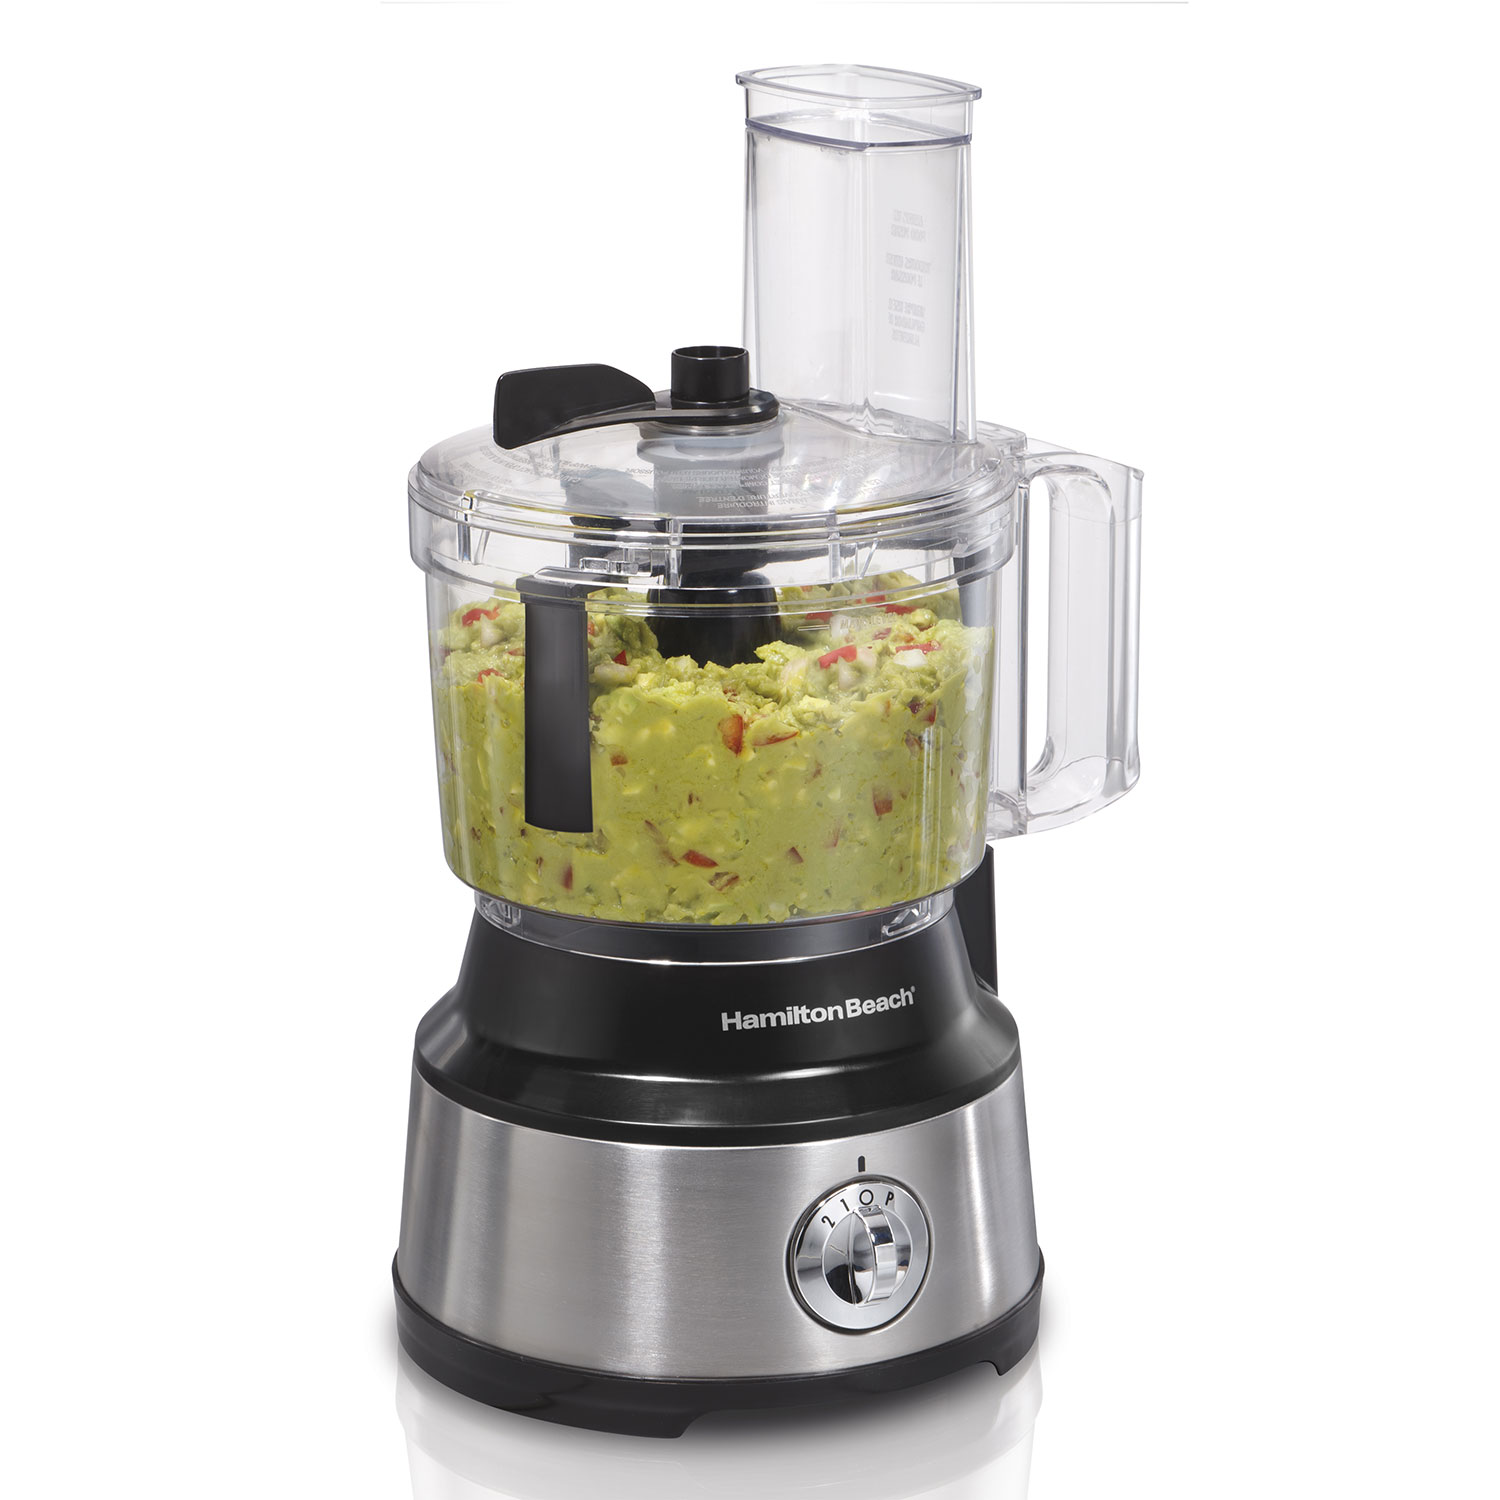 10-Cup Food Processor with Bowl Scraper, Black & Stainless (70730)